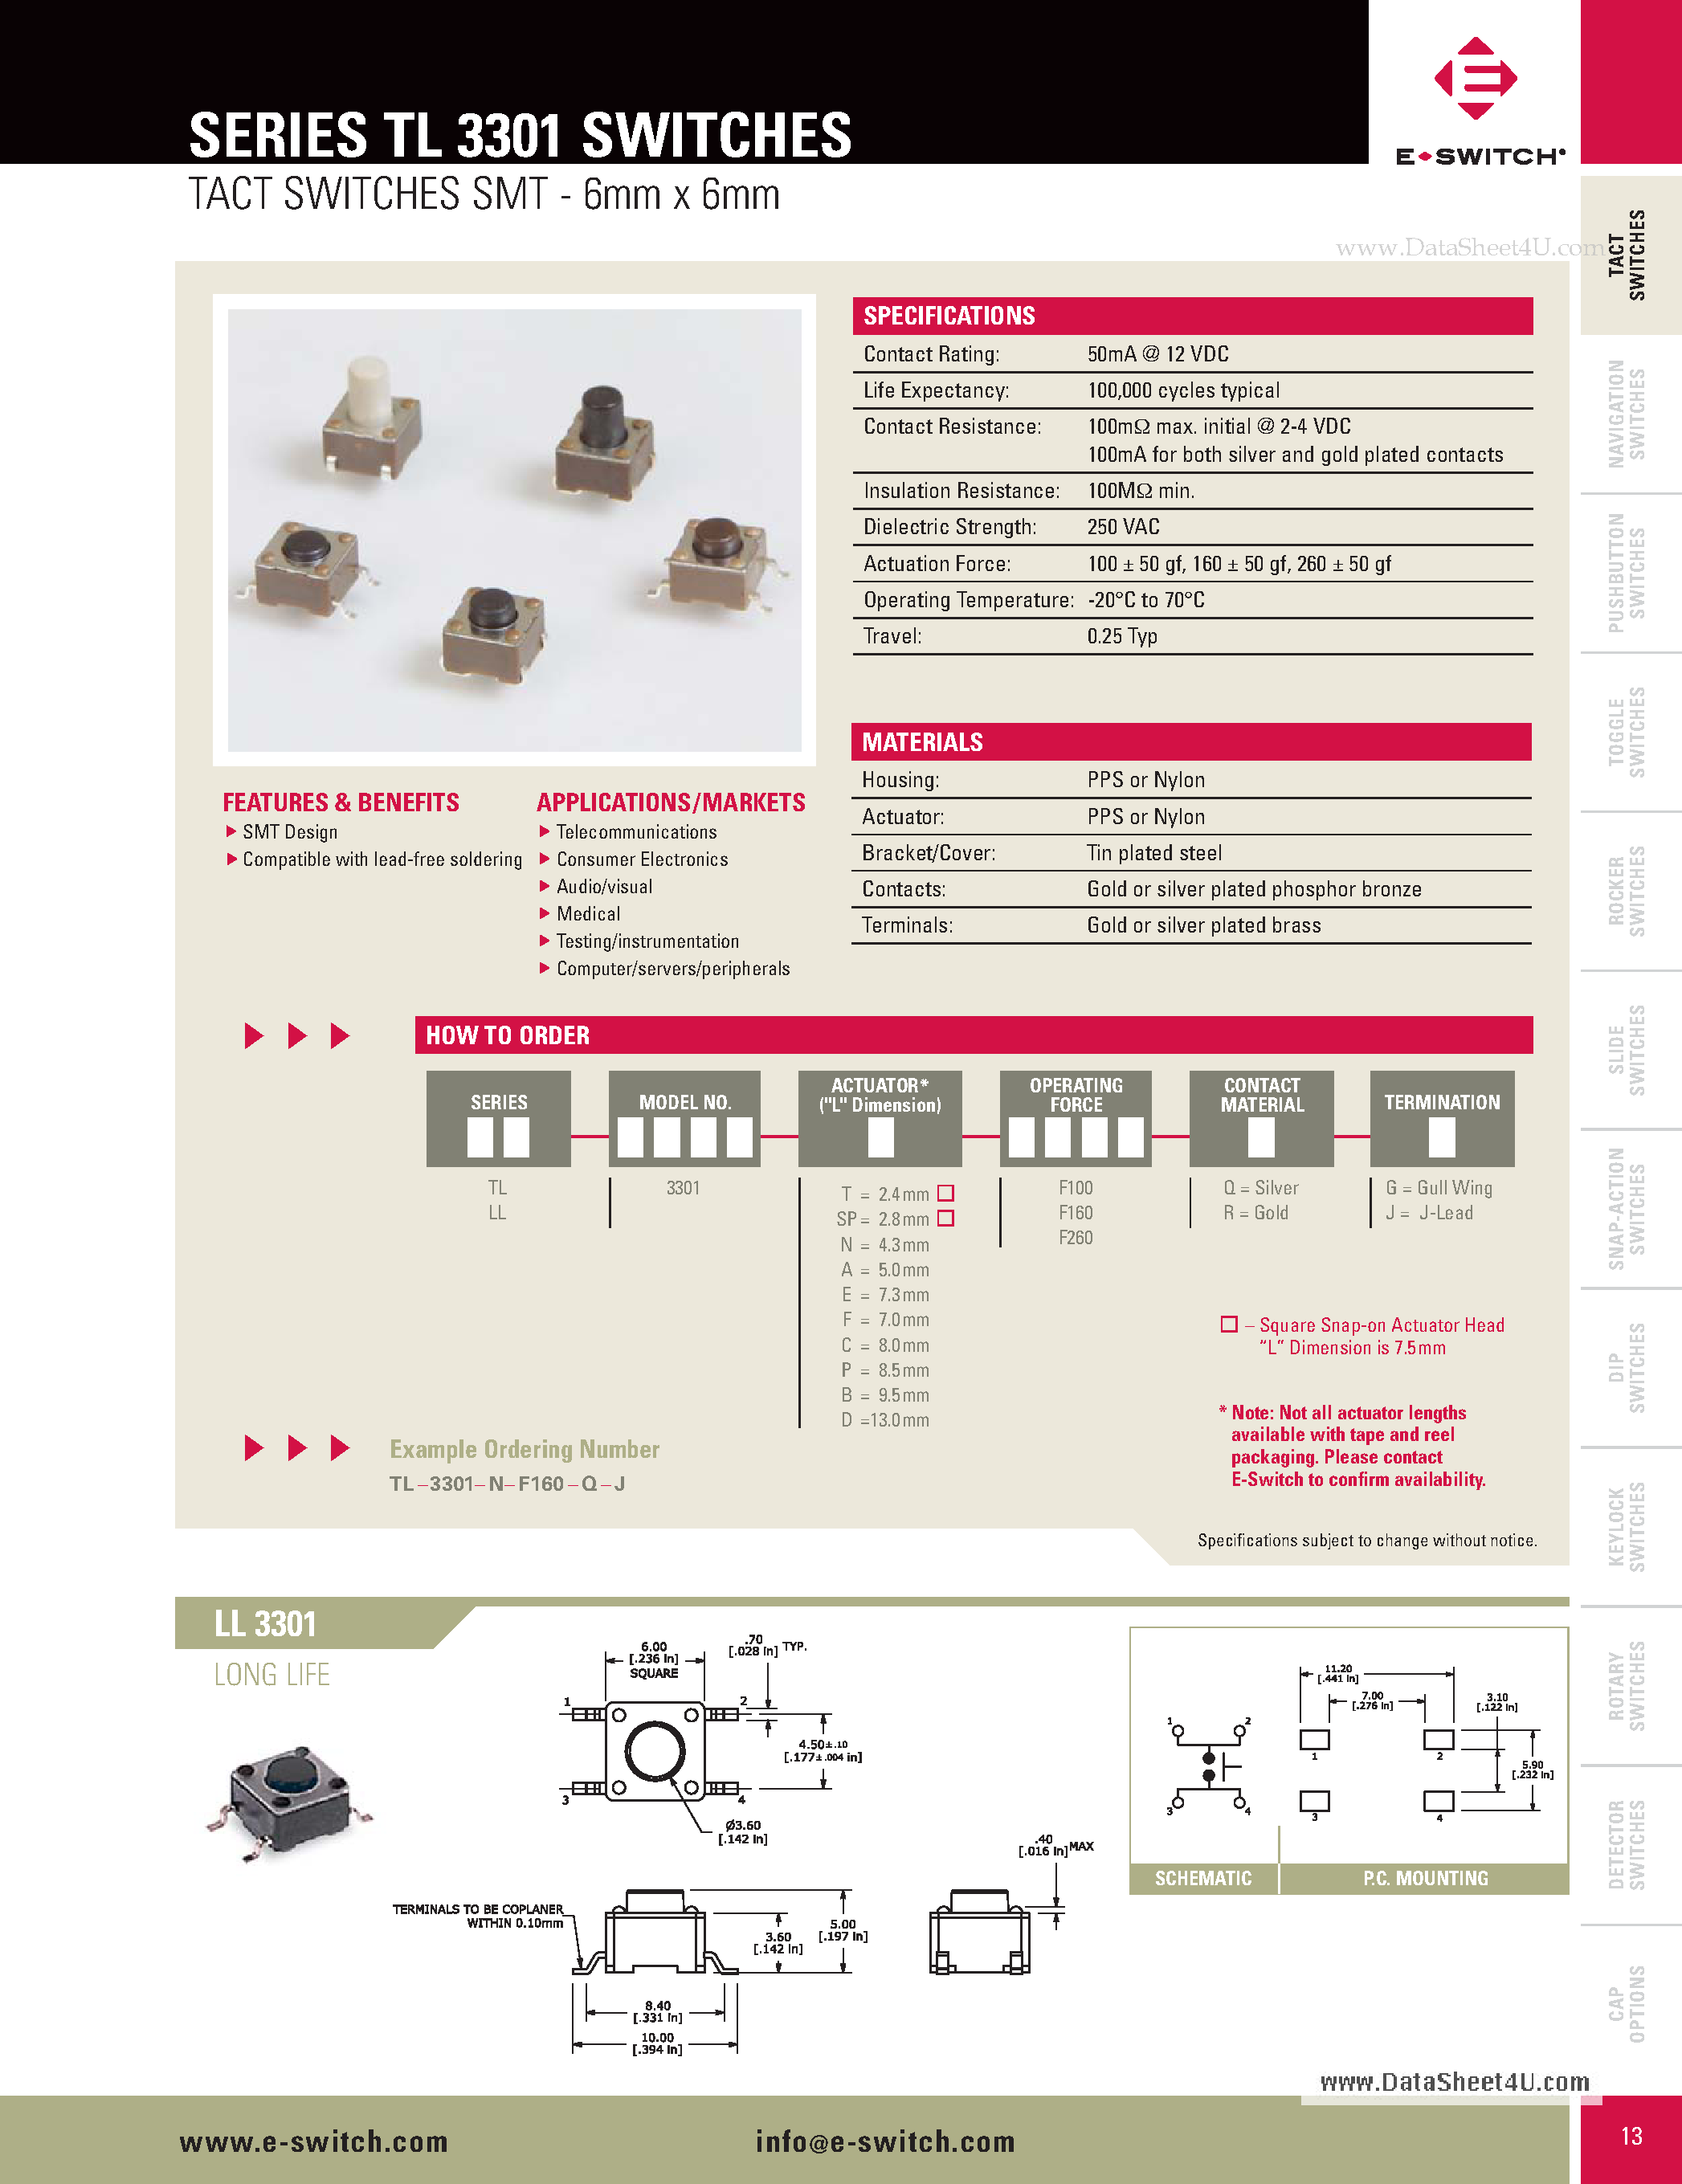 Datasheet TL3301 - TACT SWITCHES SMT page 1